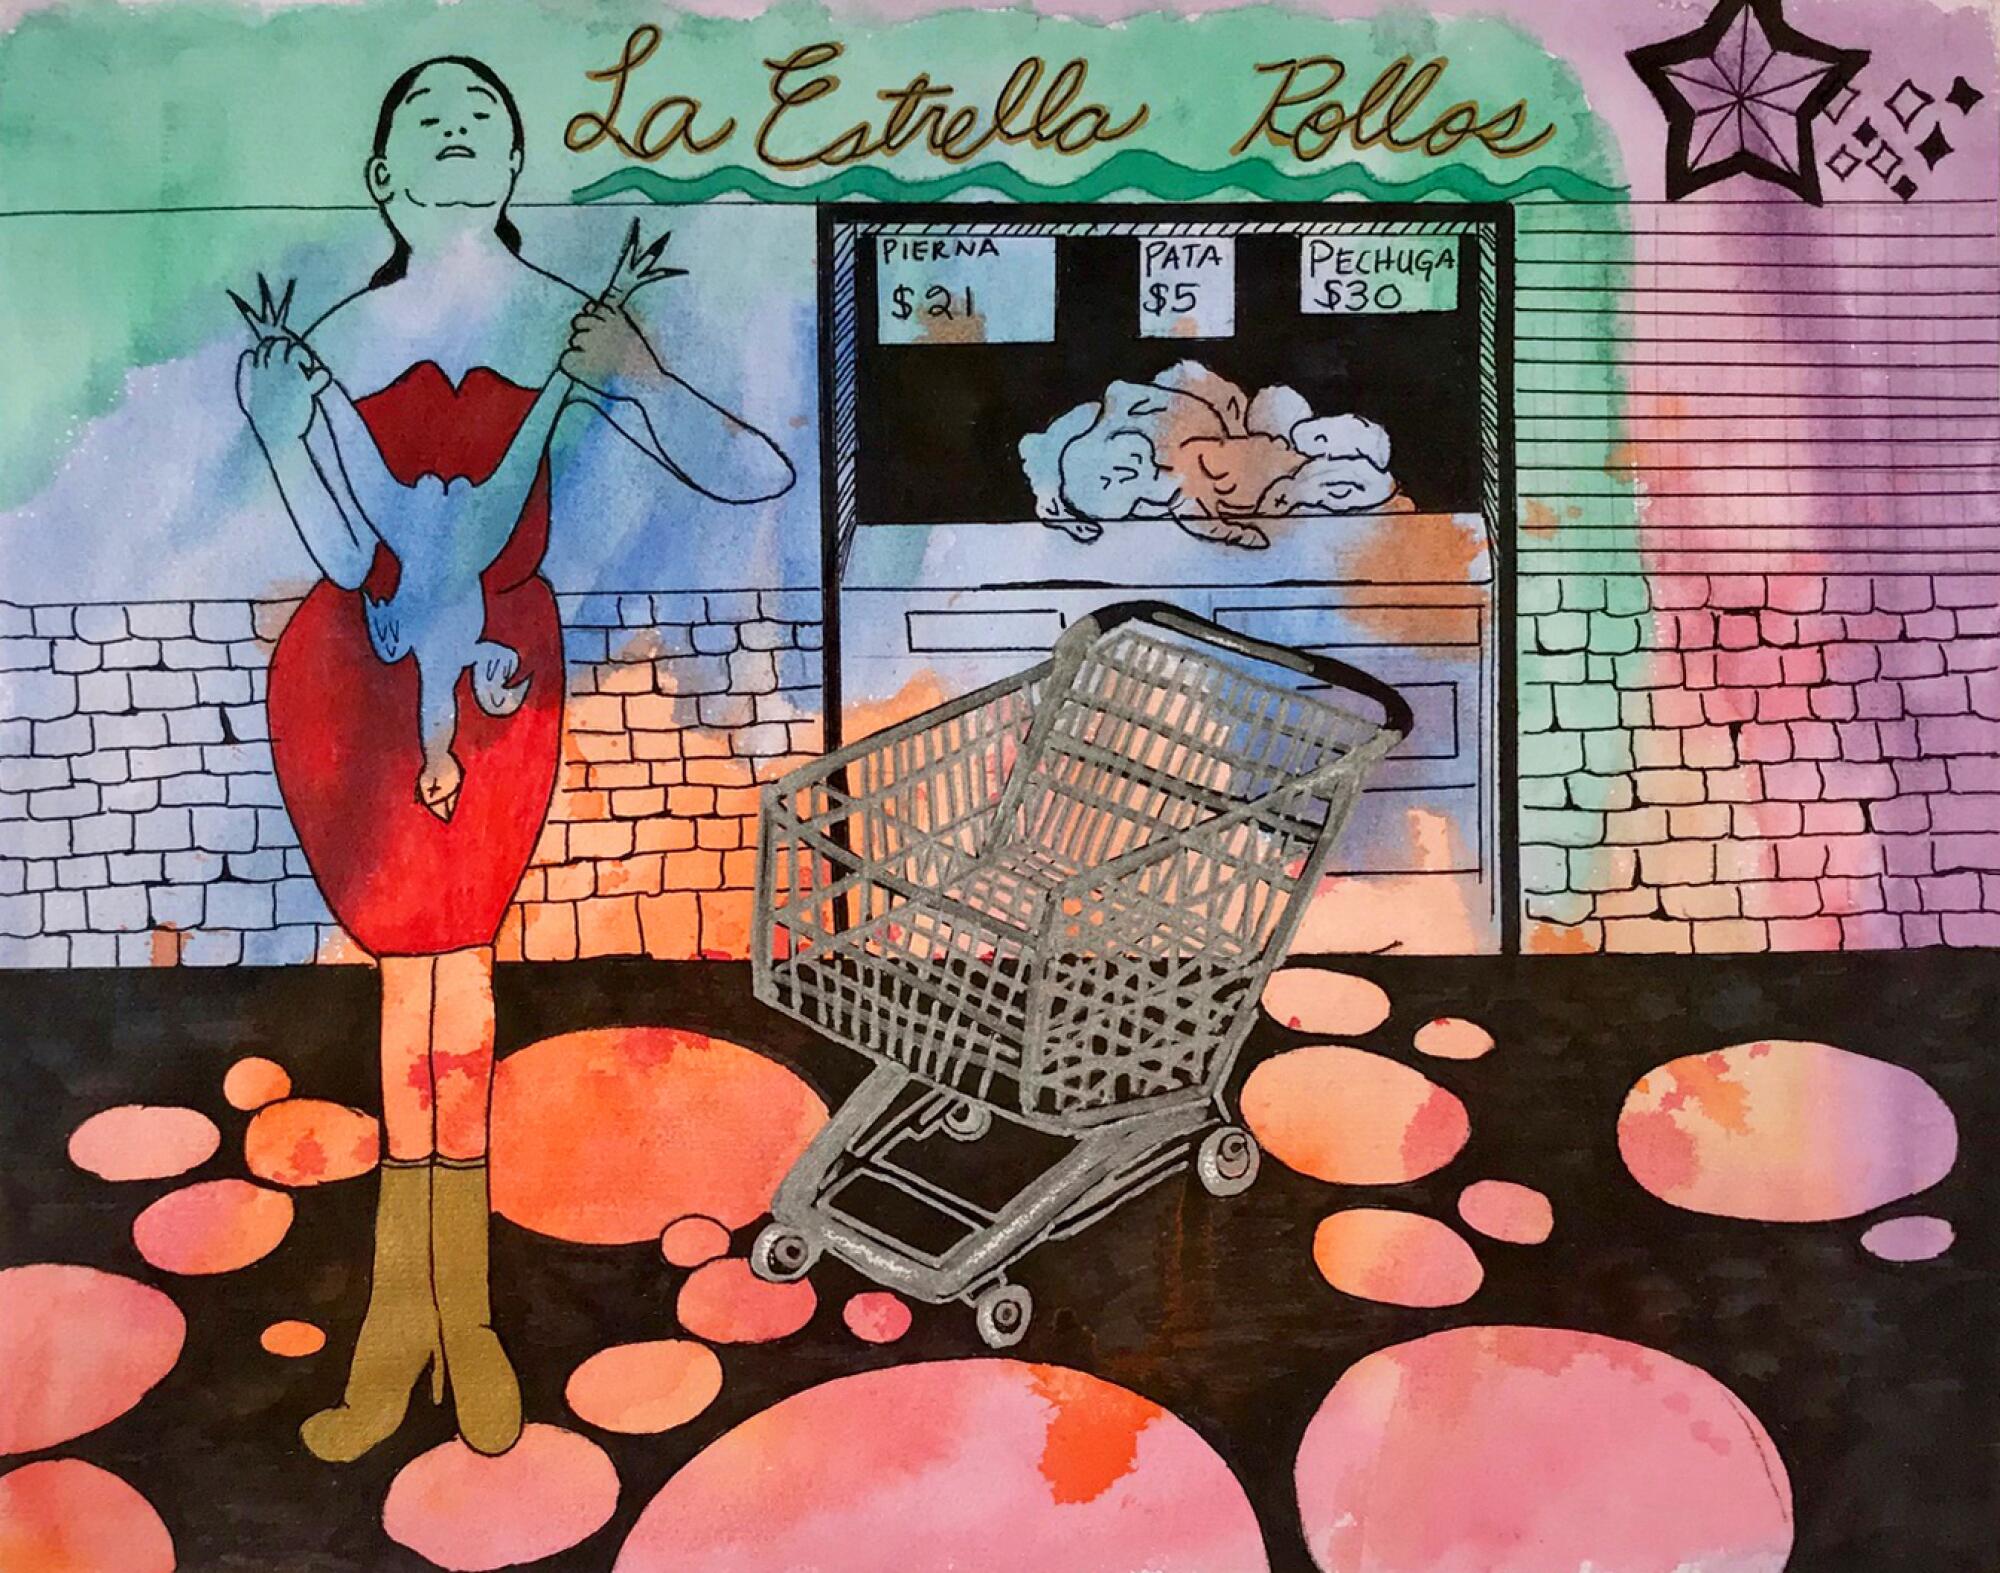 A watercolor shows a woman in a glamorous red dress holding a chicken in front of a store called Pollos La Estrella.